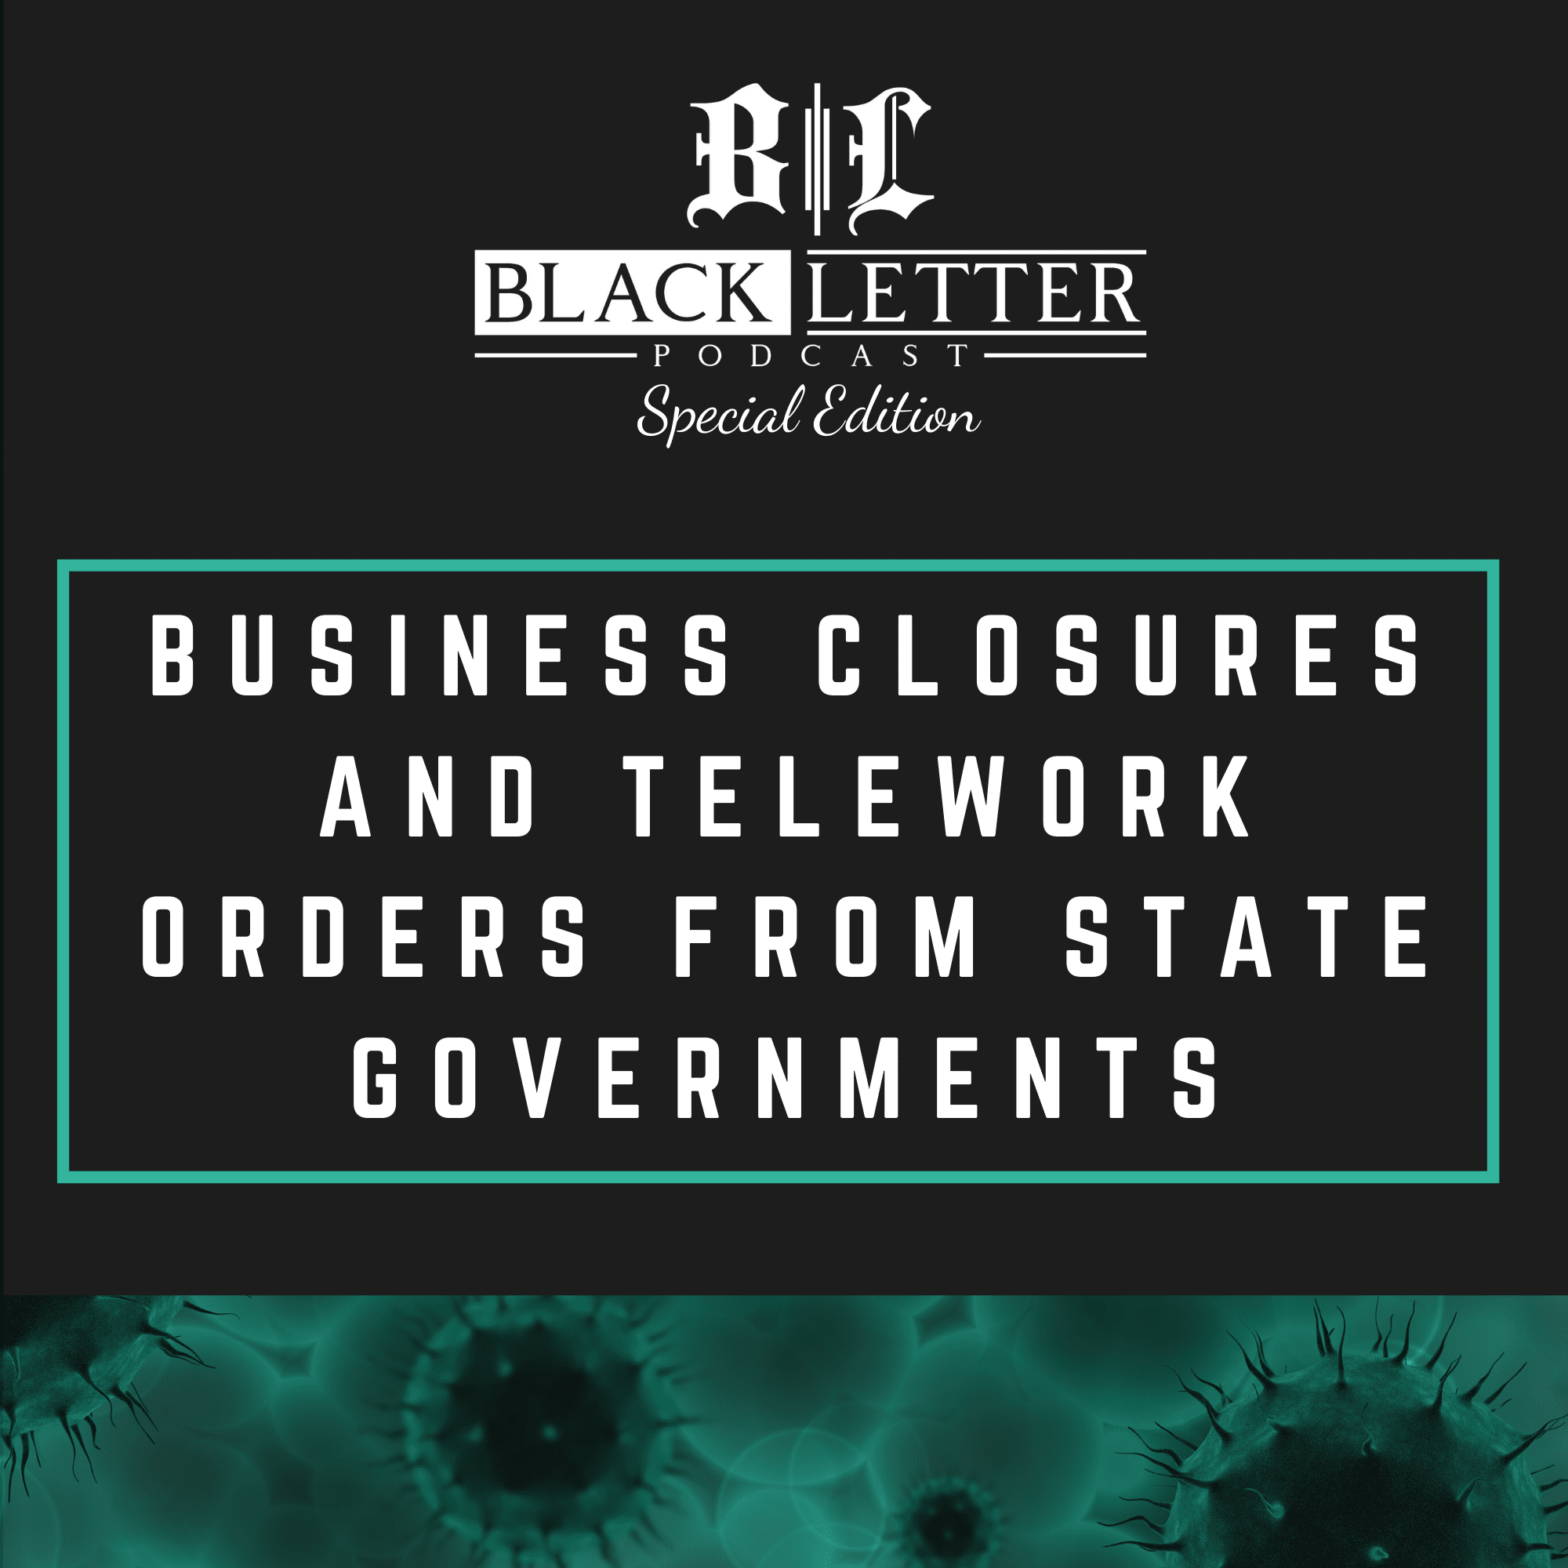 Business Closures and Telework Orders From State Governments